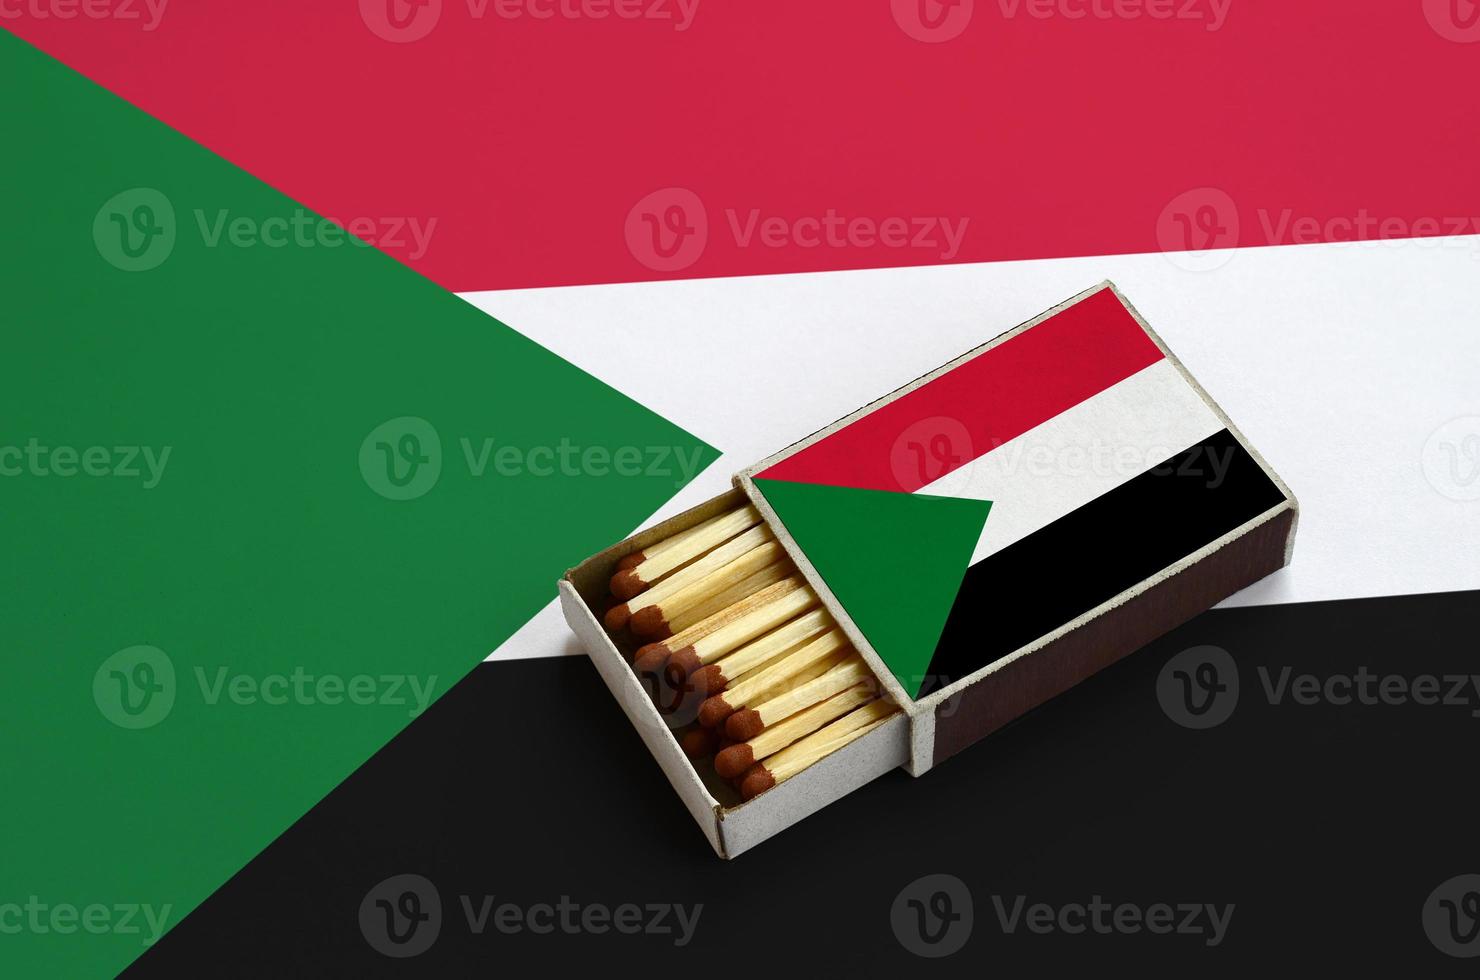 Sudan flag is shown in an open matchbox, which is filled with matches and lies on a large flag photo